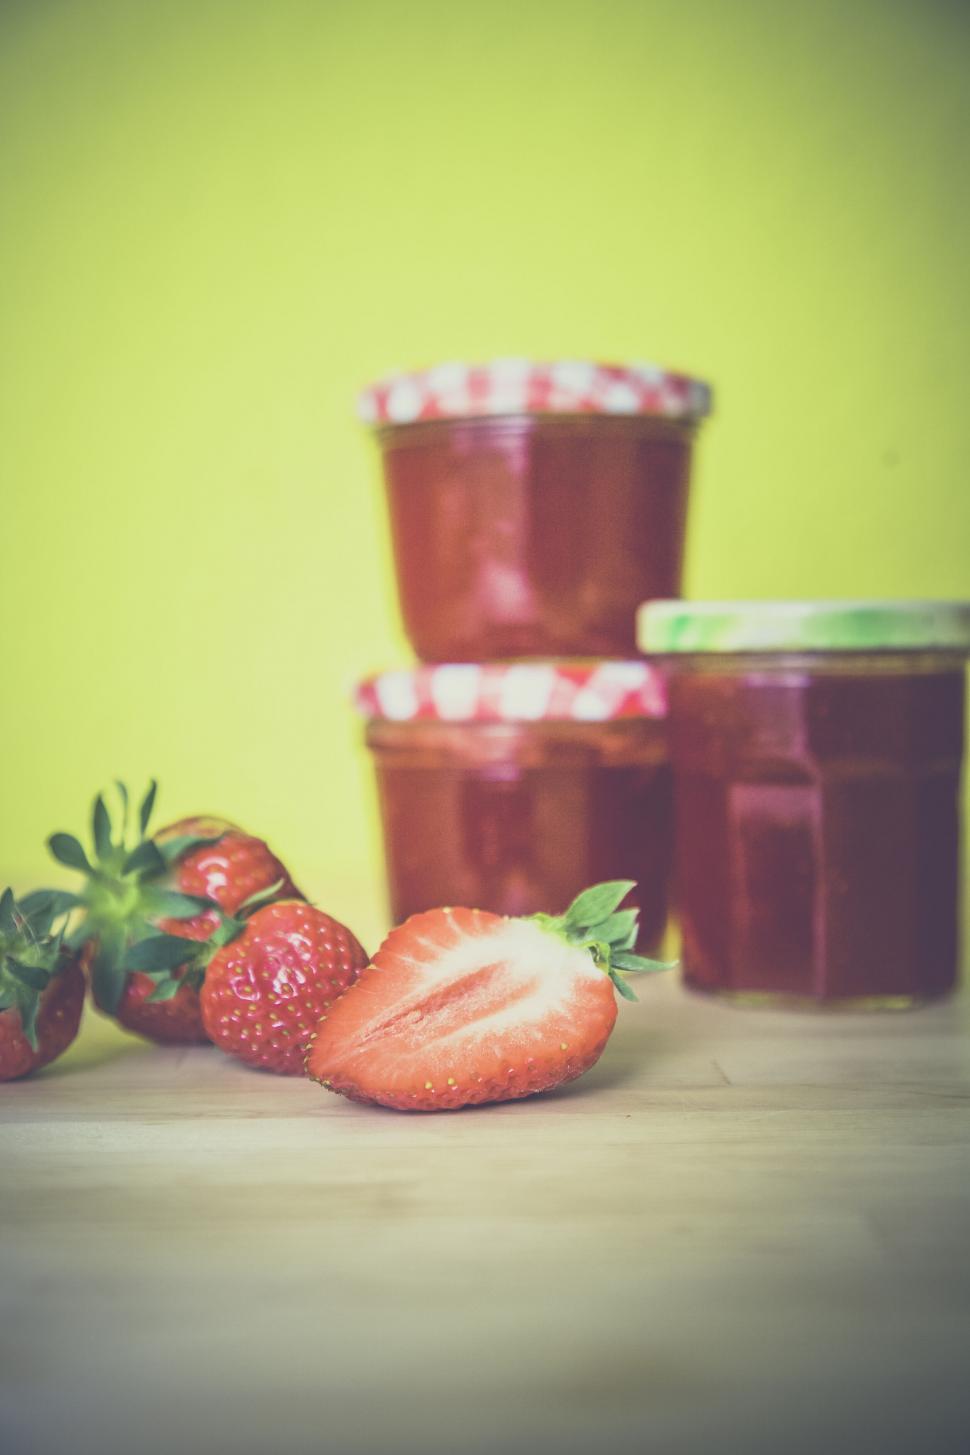 Free Image of Strawberries and jars of jam on wooden table 